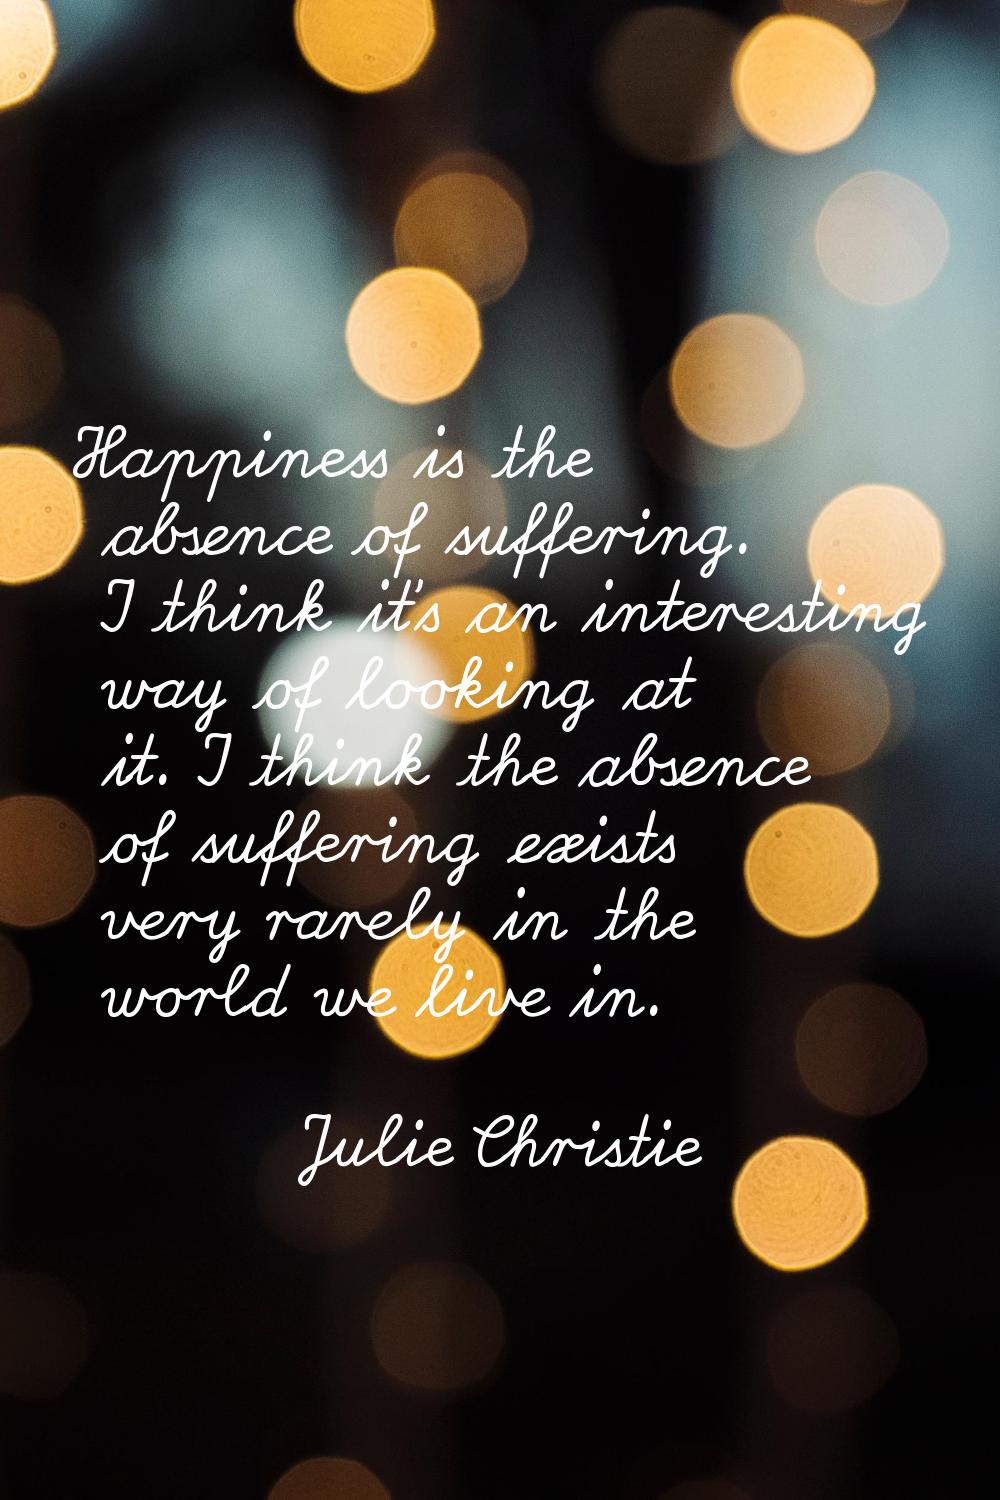 Happiness is the absence of suffering. I think it's an interesting way of looking at it. I think th